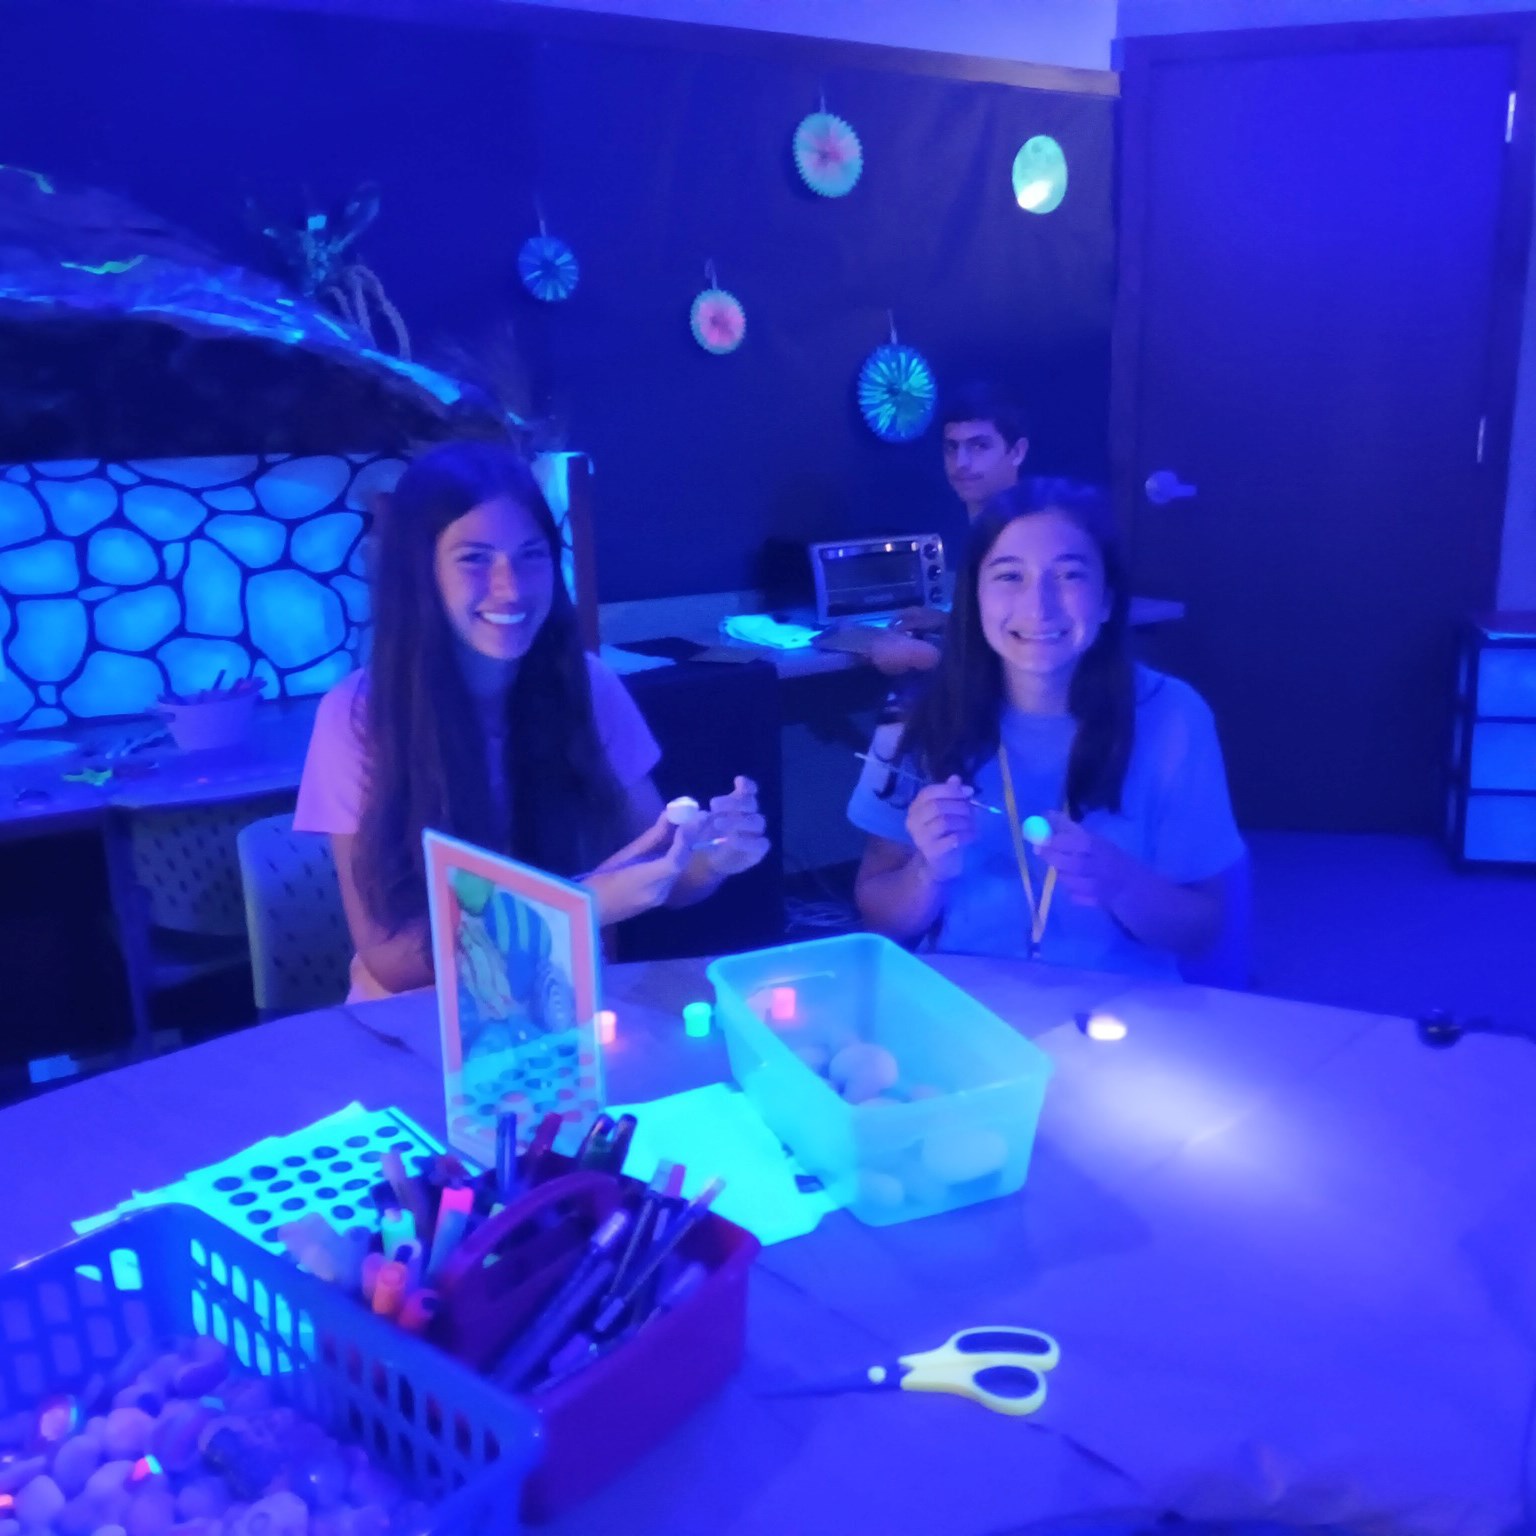 Three children in a low-lite room with glow-in-dark artwork on the walls around them.